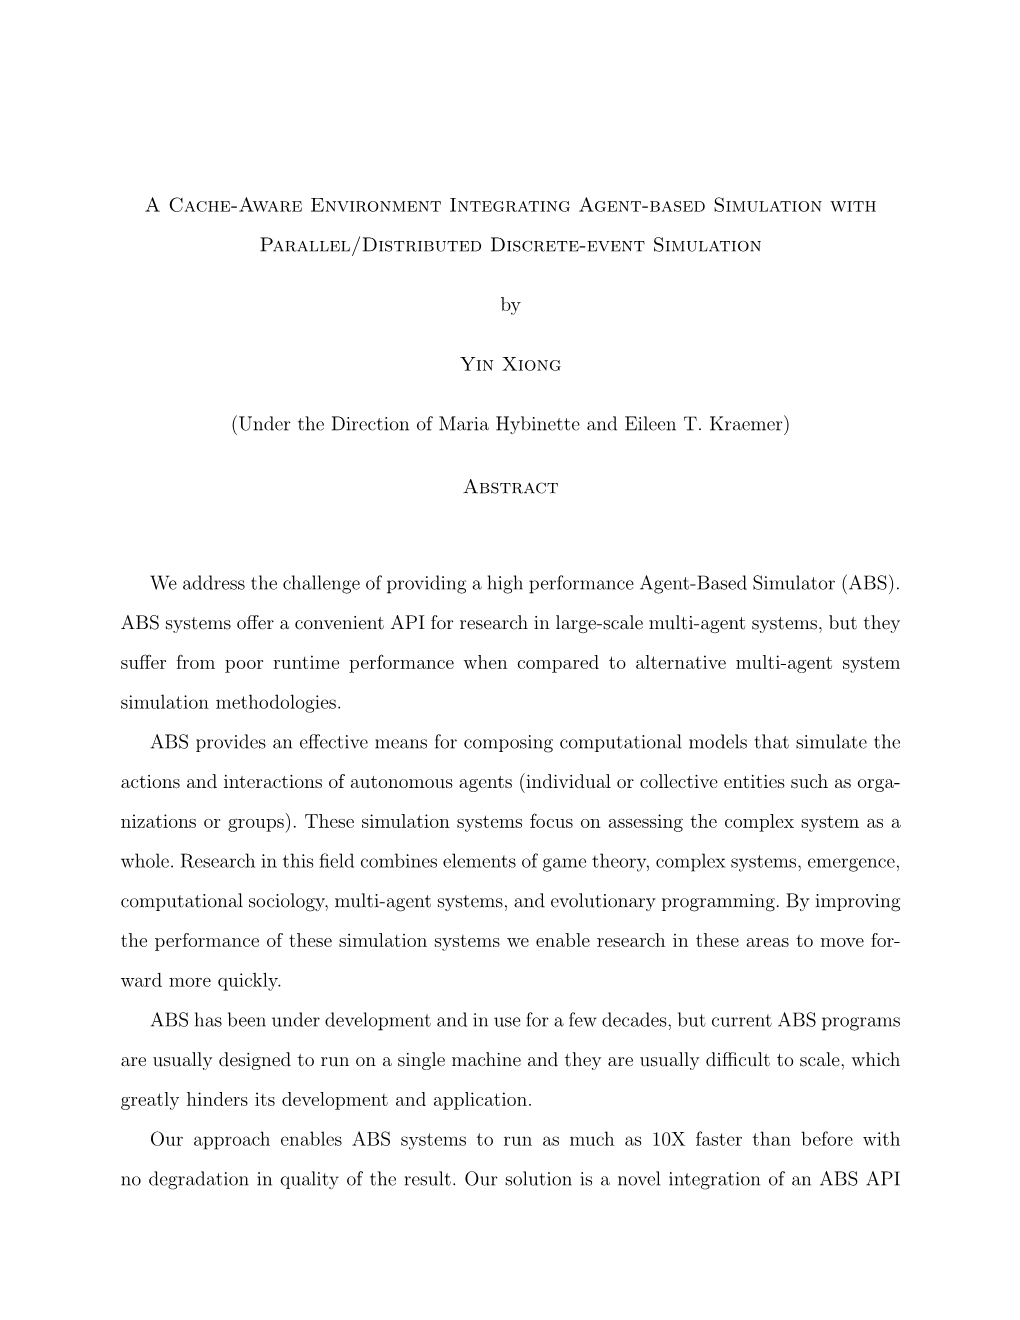 A Cache-Aware Environment Integrating Agent-Based Simulation with Parallel/Distributed Discrete-Event Simulation by Yin Xiong